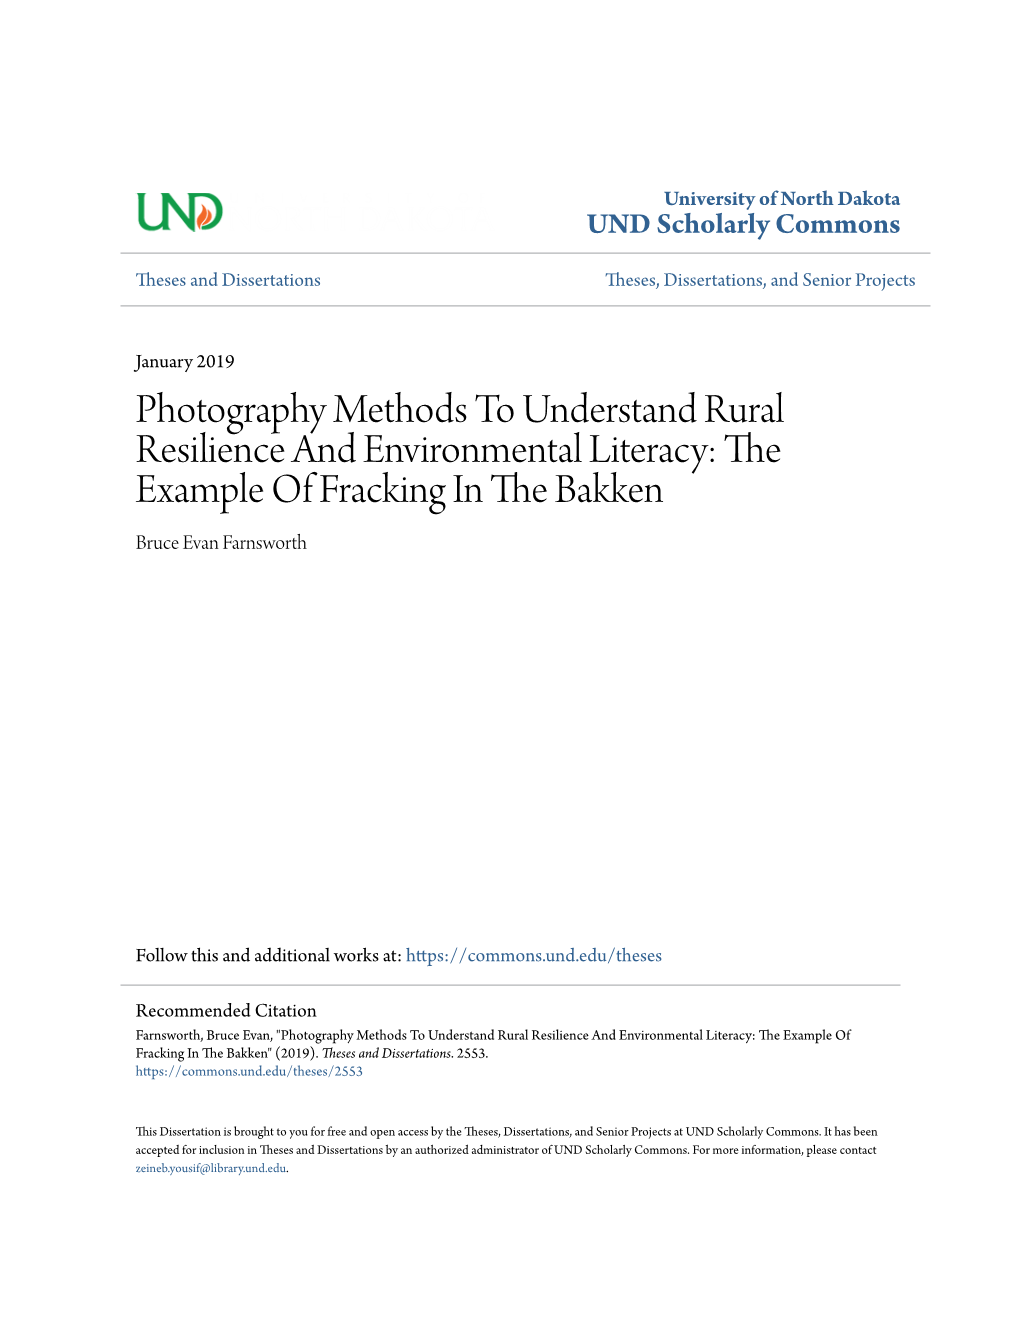 Photography Methods to Understand Rural Resilience and Environmental Literacy: the Example of Fracking in the Akb Ken Bruce Evan Farnsworth